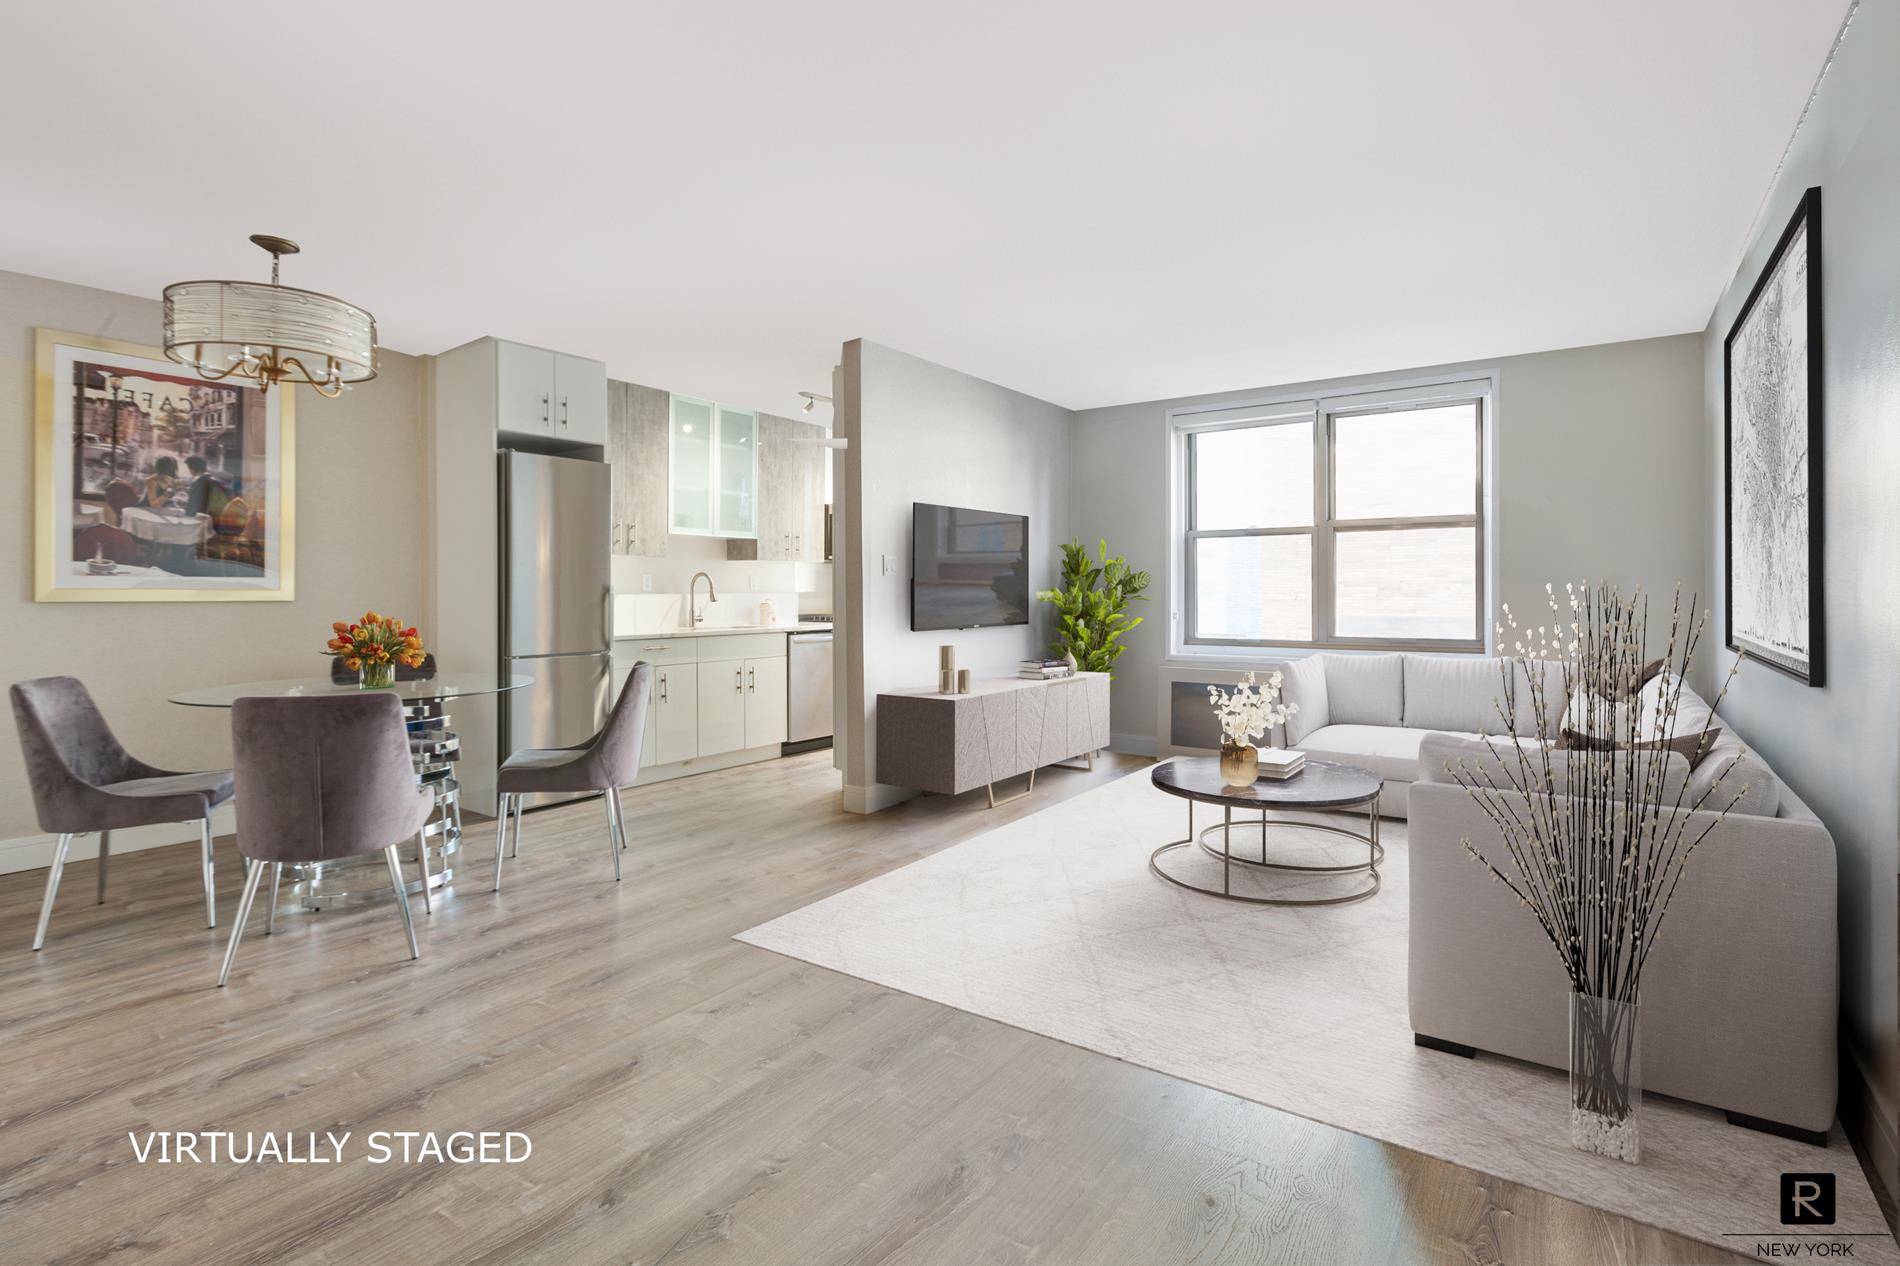 Situated on a lovely, tree lined street in the heart of the Upper East Side, this spacious, north facing junior 4 has a large living dining area and beautiful renovated ...